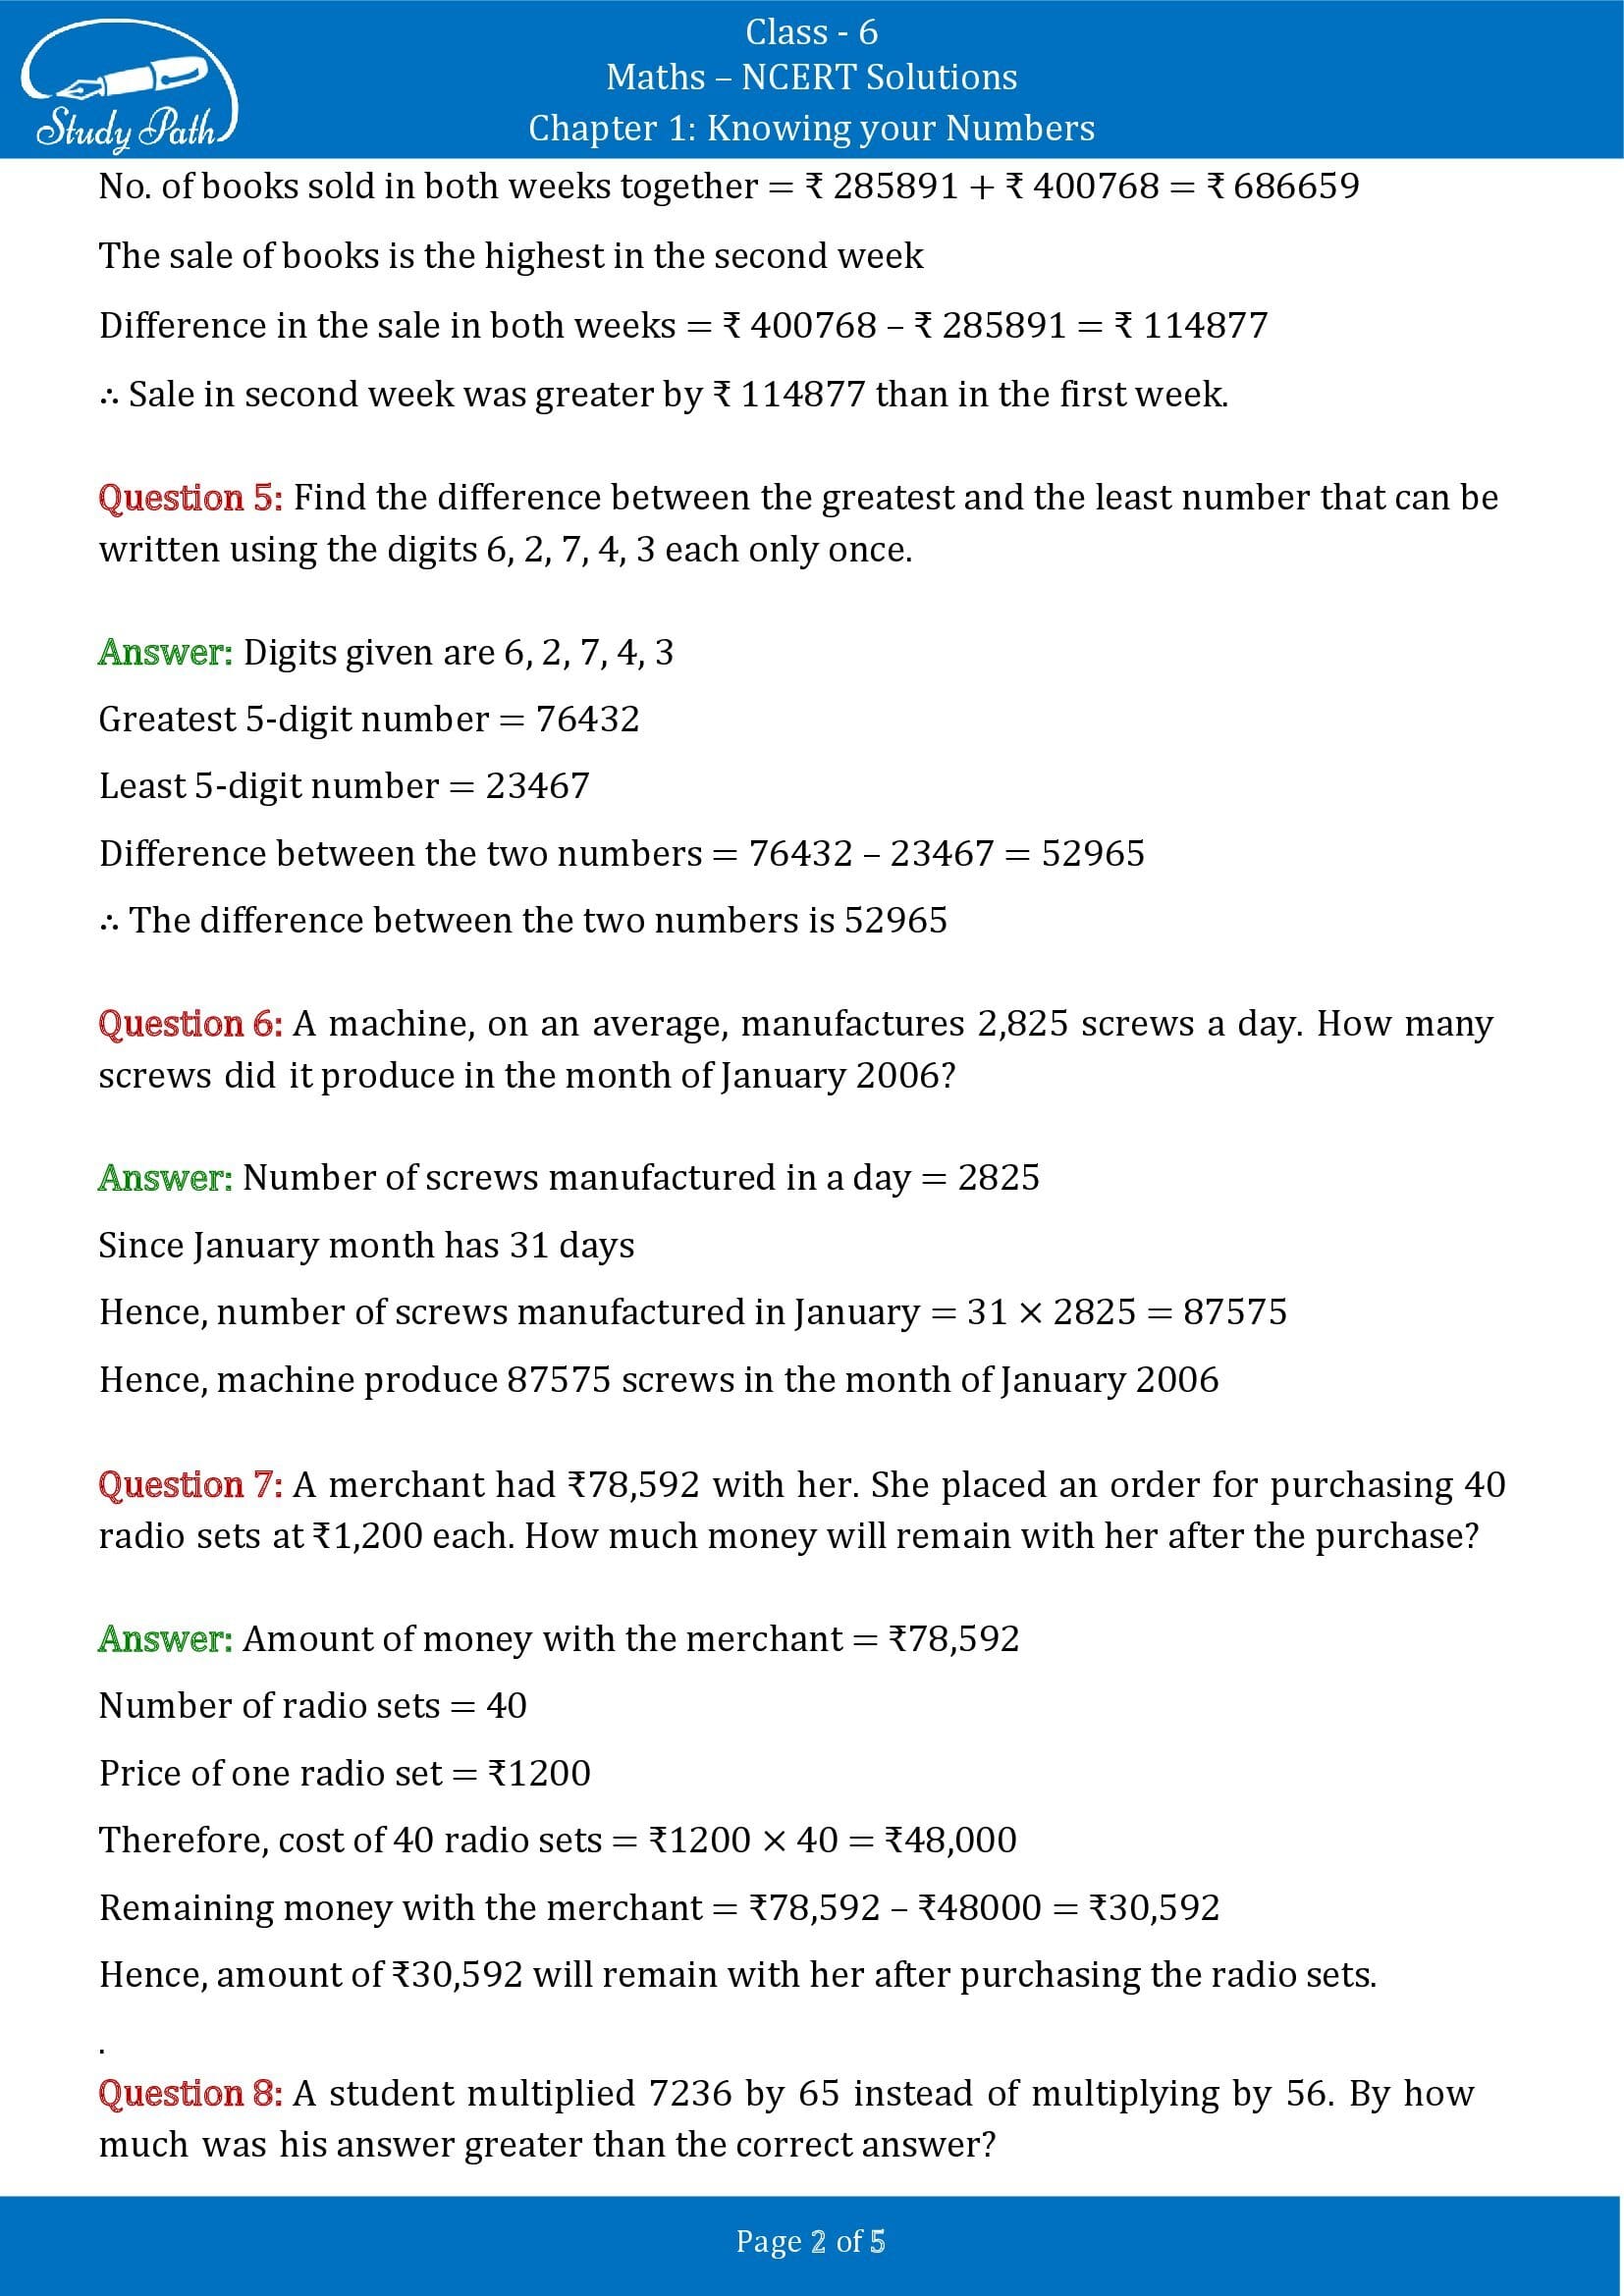 NCERT Solutions for Class 6 Maths Chapter 1 Knowing Your Numbers Exercise 1.2 00002